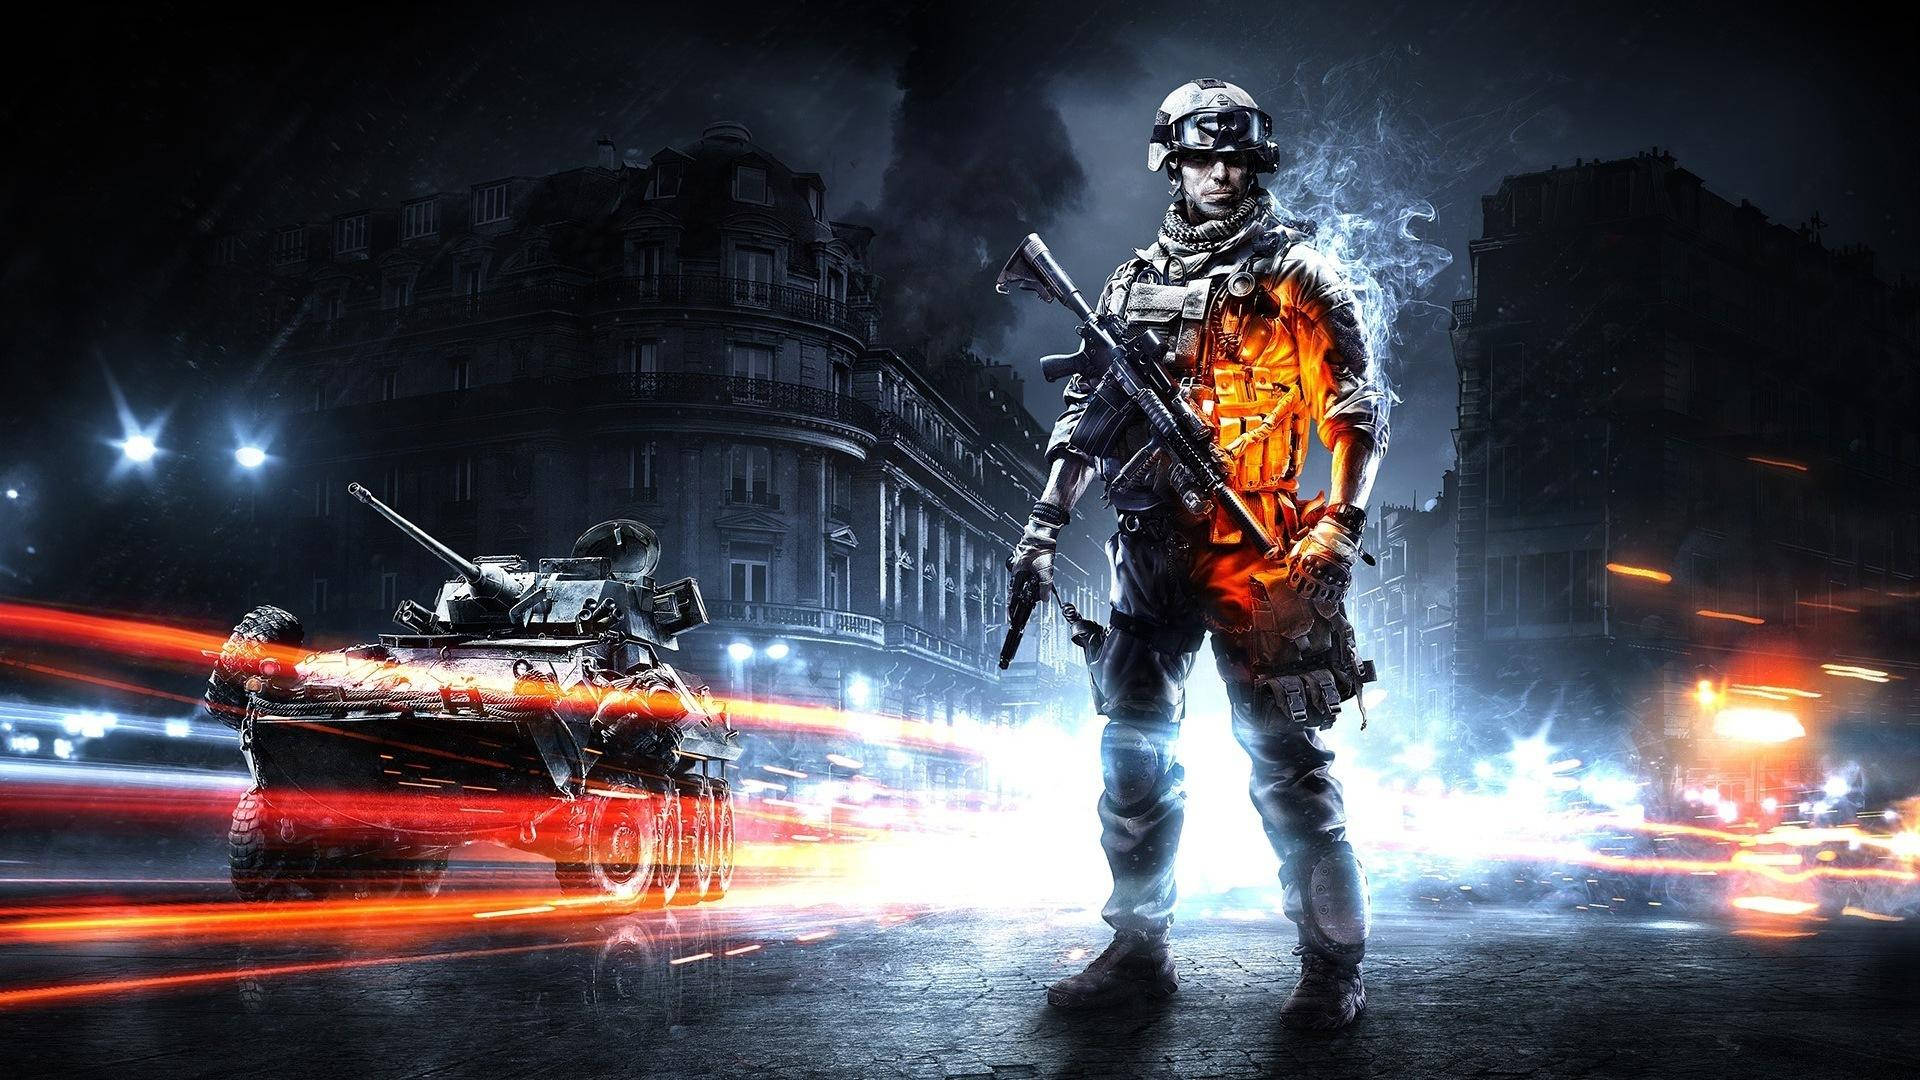 Battlefield 3 Poster In Action Background